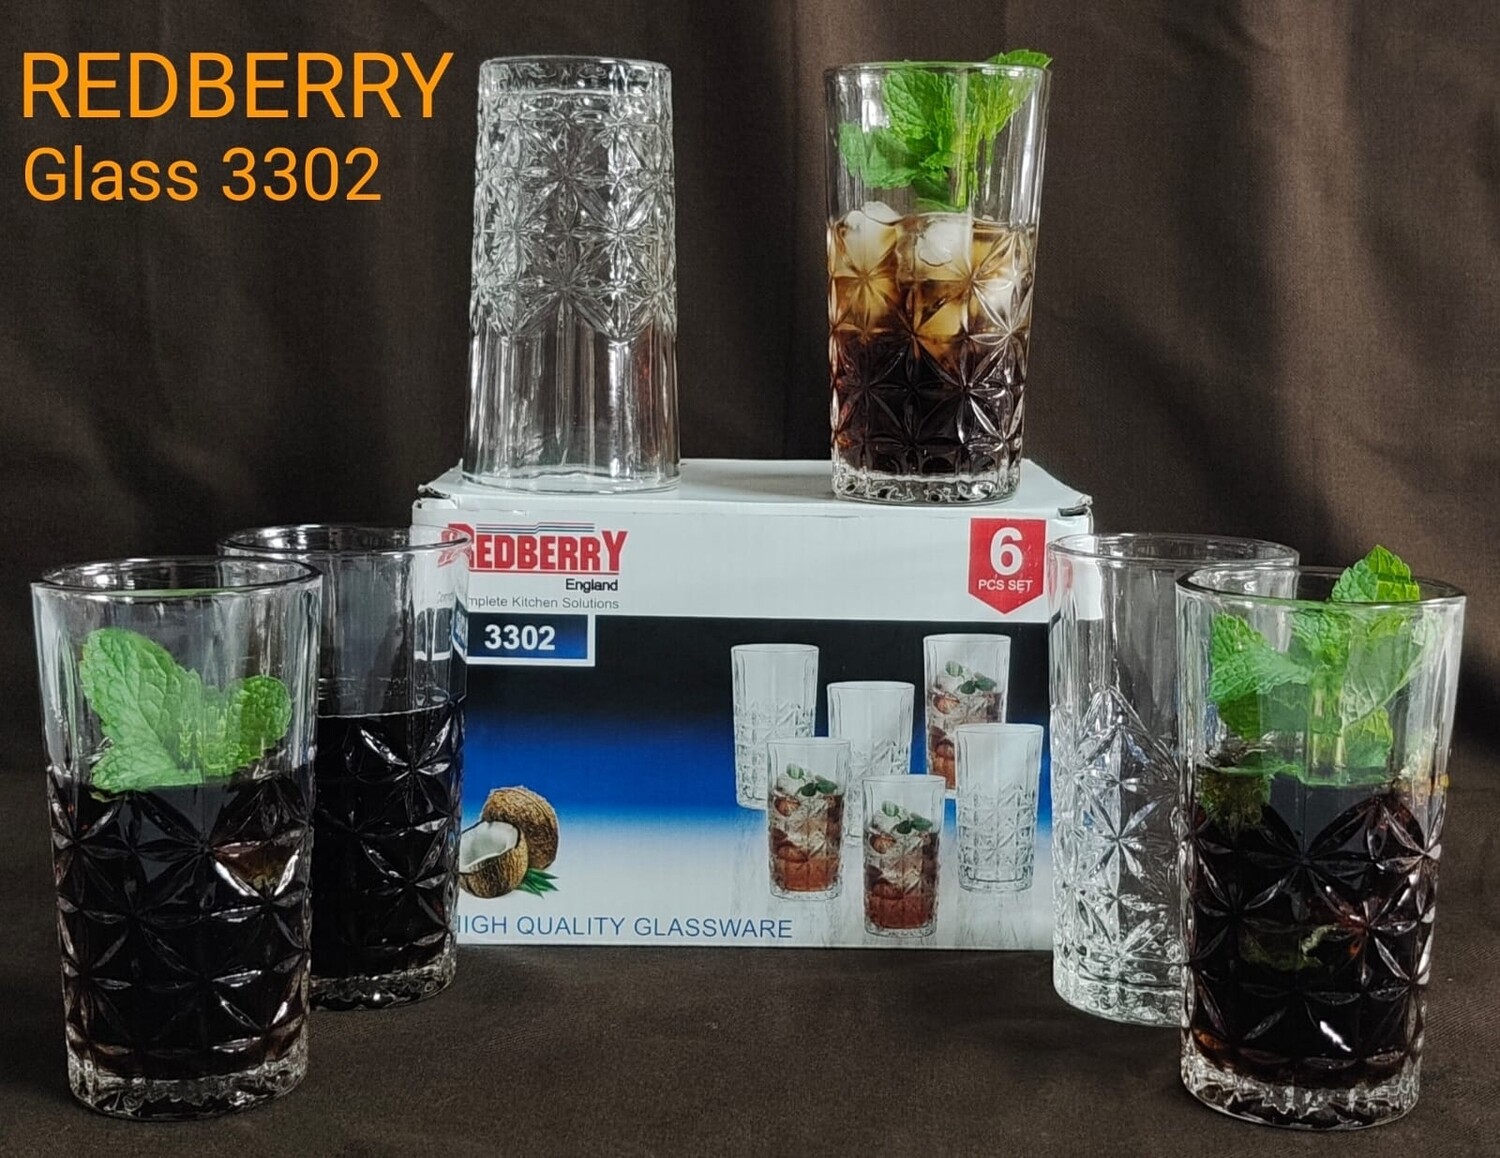 Redberry 6pcs Glass Set. Water or juice glass #3302